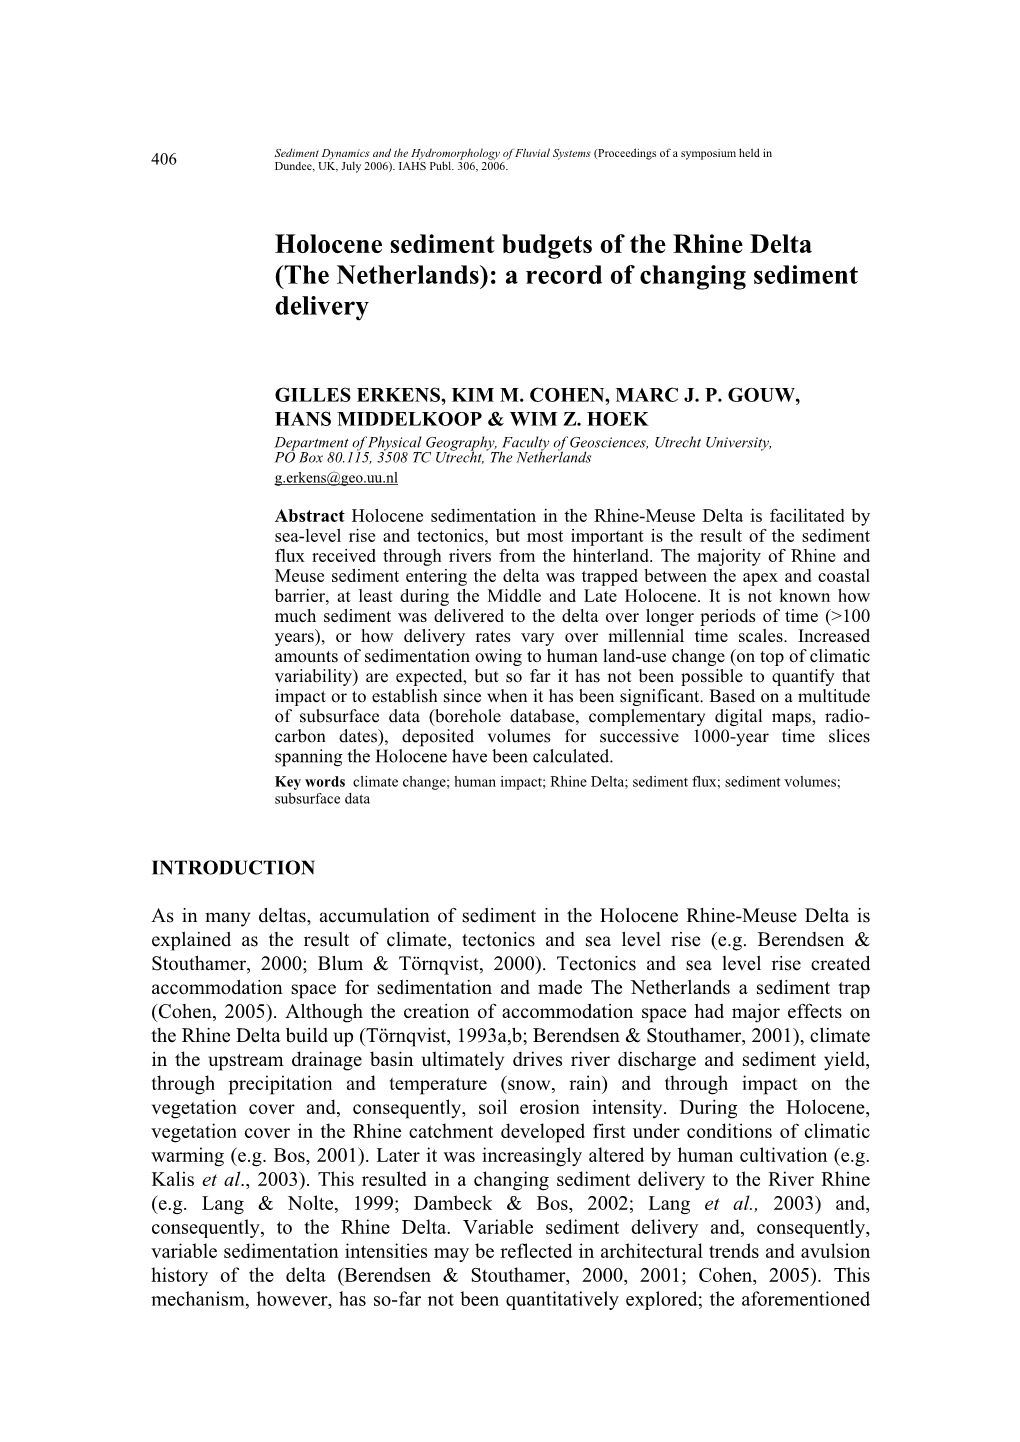 Holocene Sediment Budgets of the Rhine Delta (The Netherlands): a Record of Changing Sediment Delivery